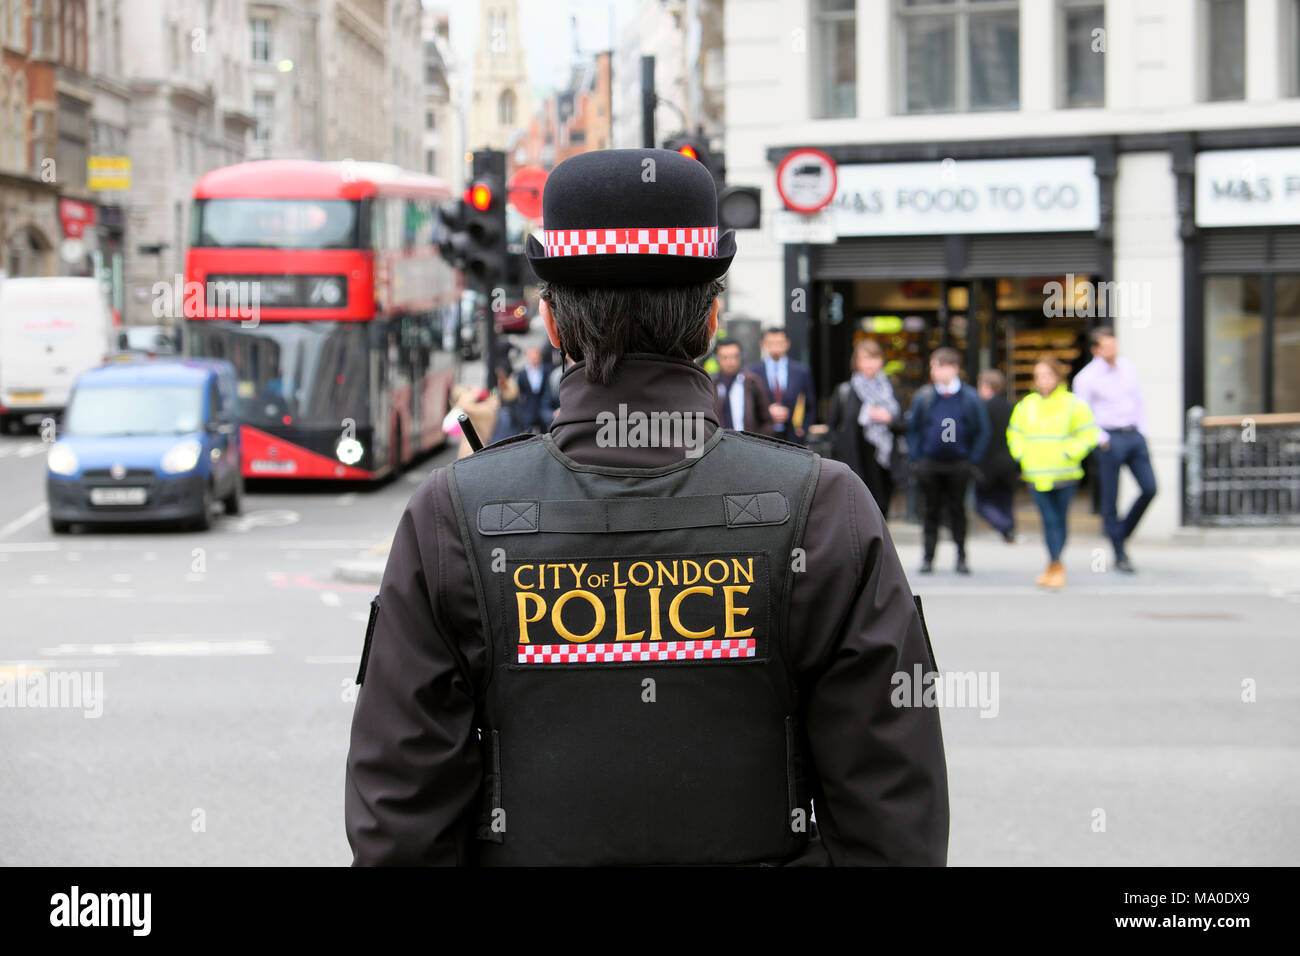 City of London Police logo on back of uniform jacket of policewoman (police woman) on the street in Farringdon area of Central London UK  KATHY DEWITT Stock Photo